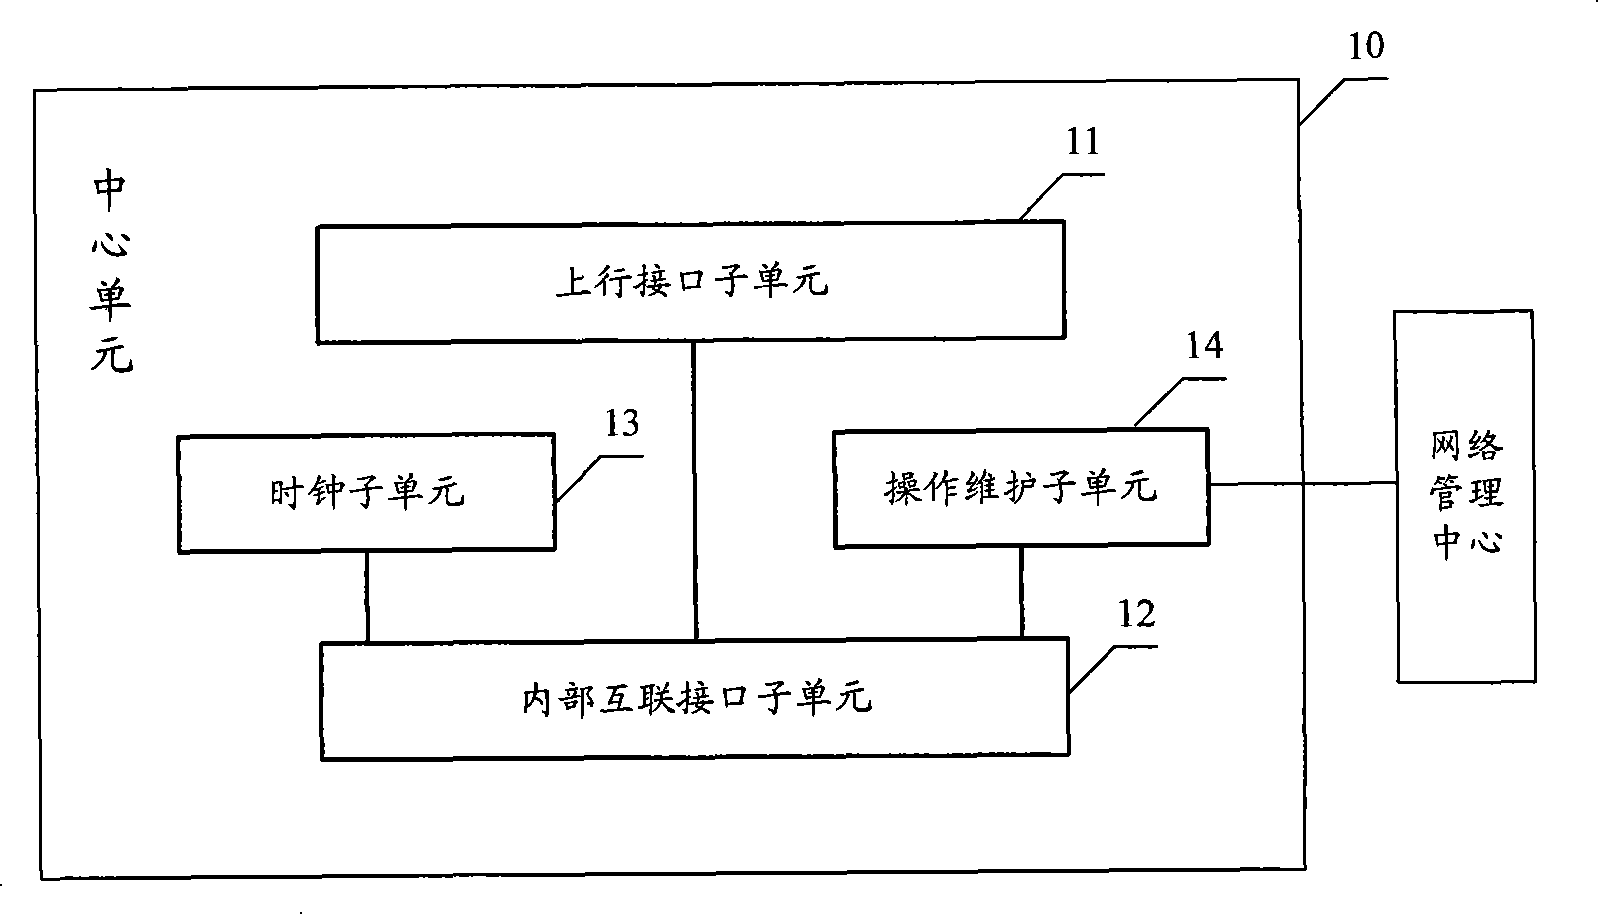 Distributed base station controller and its unit, data transmission method